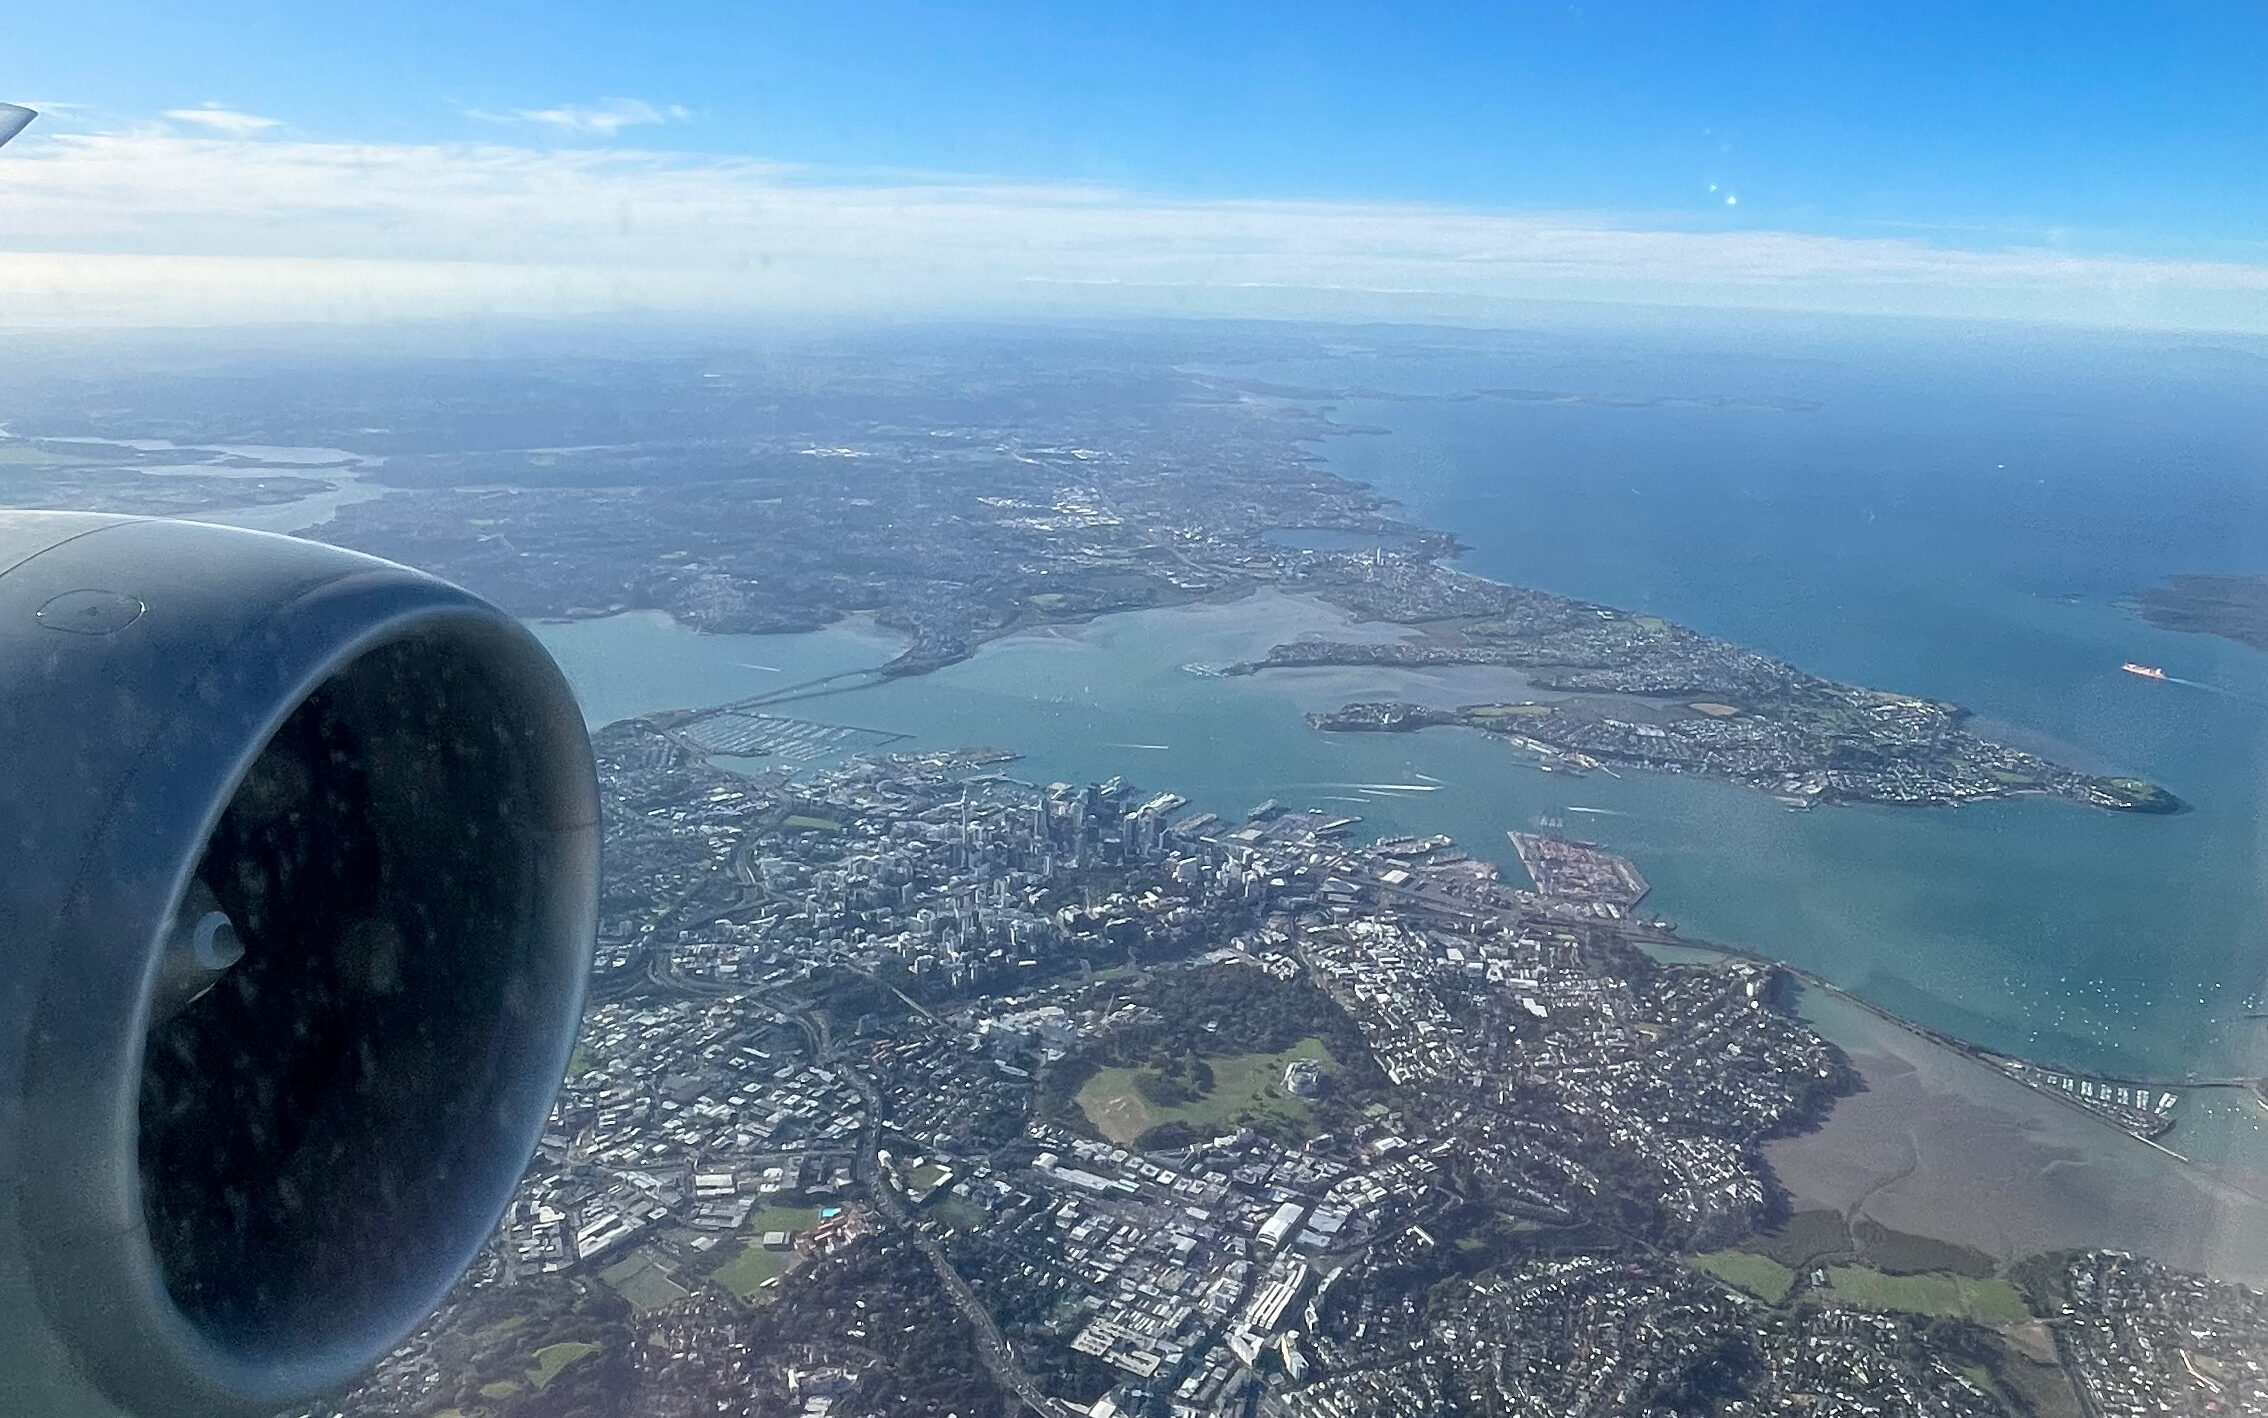 View of Auckland CBD from an Airplane on approach into Auckland Airport.